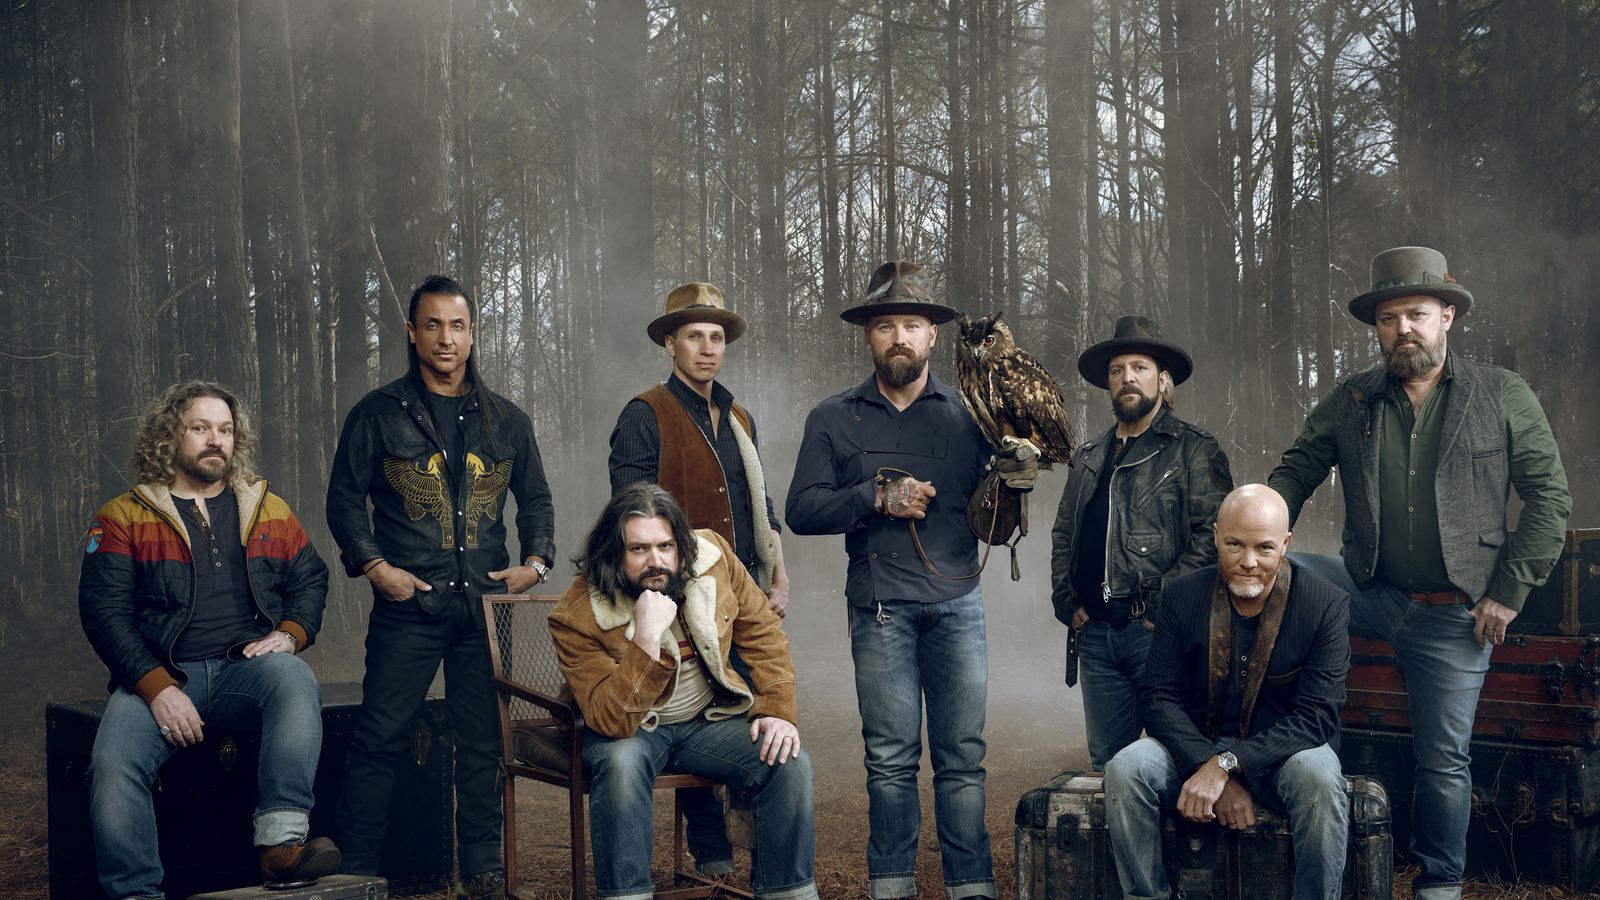 Coronavirus: Zac Brown Band cancels tour, Tampa show after laying off crew